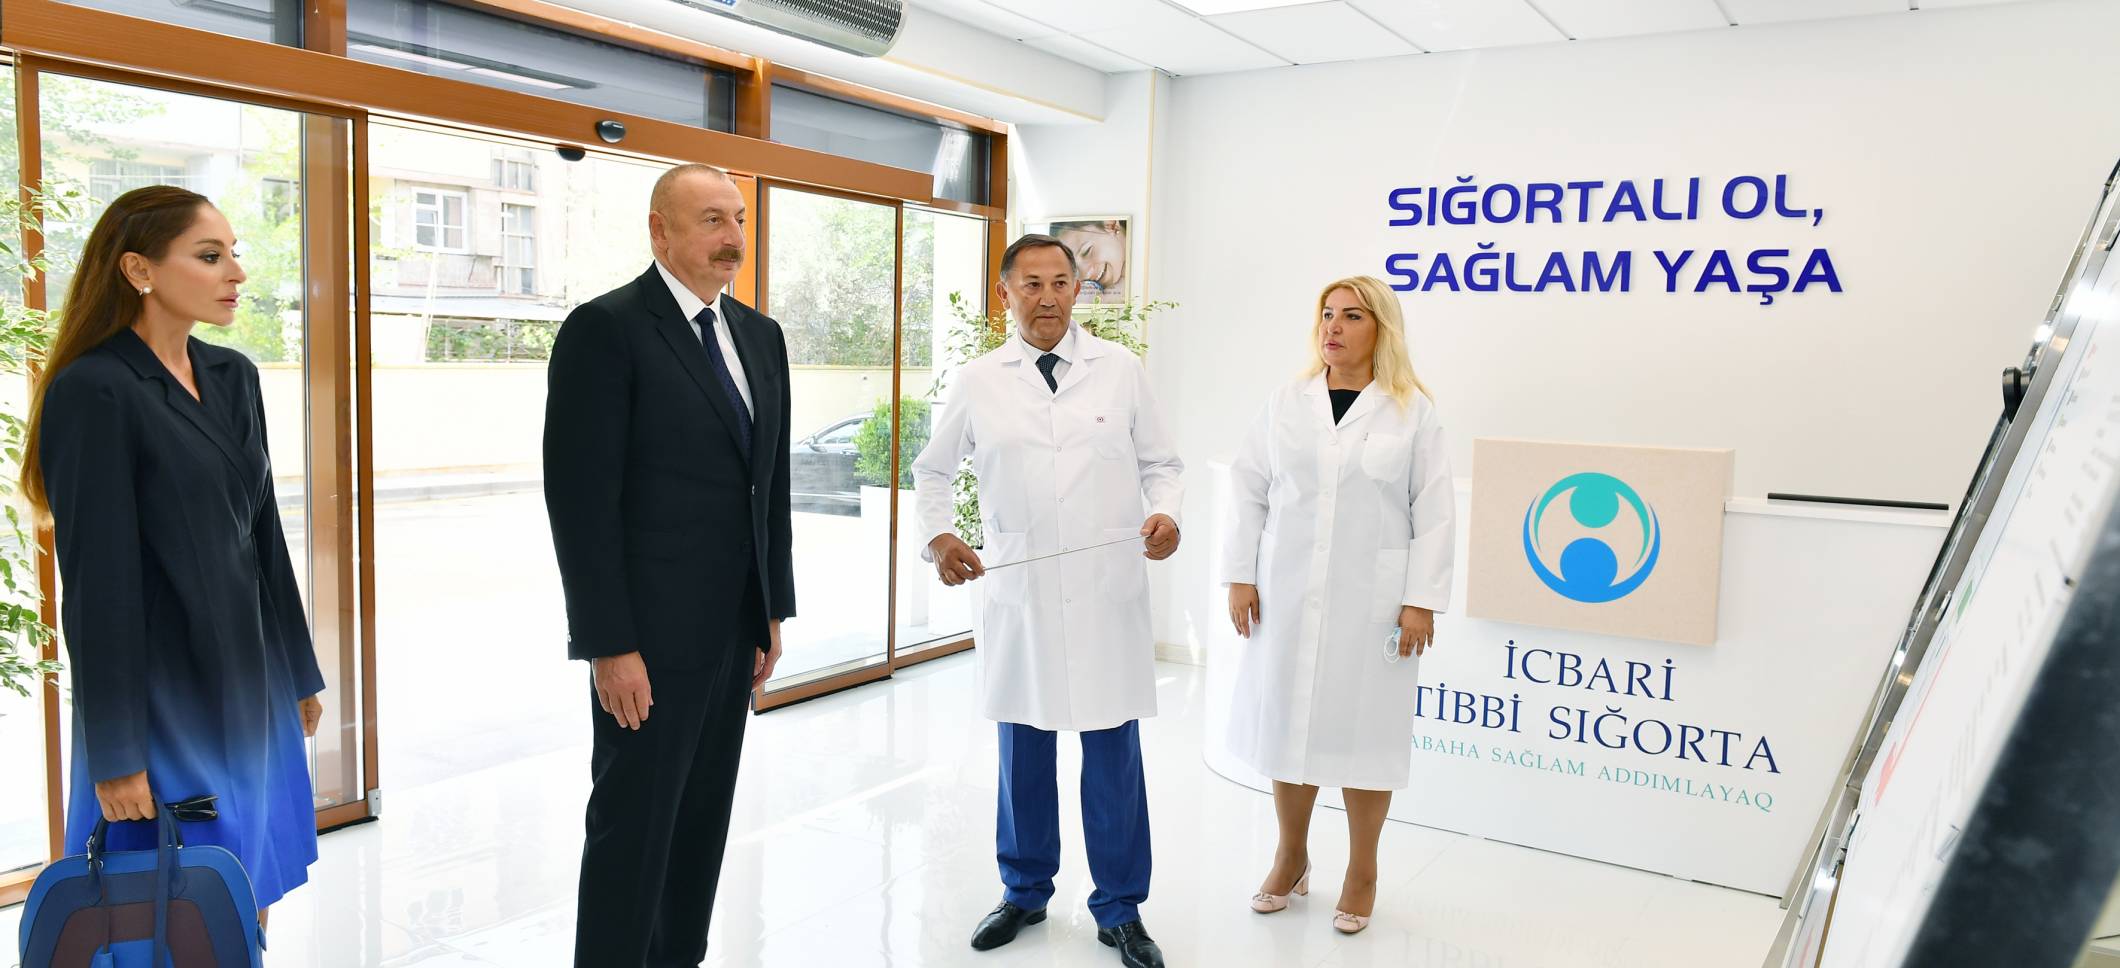 President Ilham Aliyev and First Lady Mehriban Aliyeva viewed conditions created at maternity hospital No 2 in Bakikhanov district of Baku after major overhaul